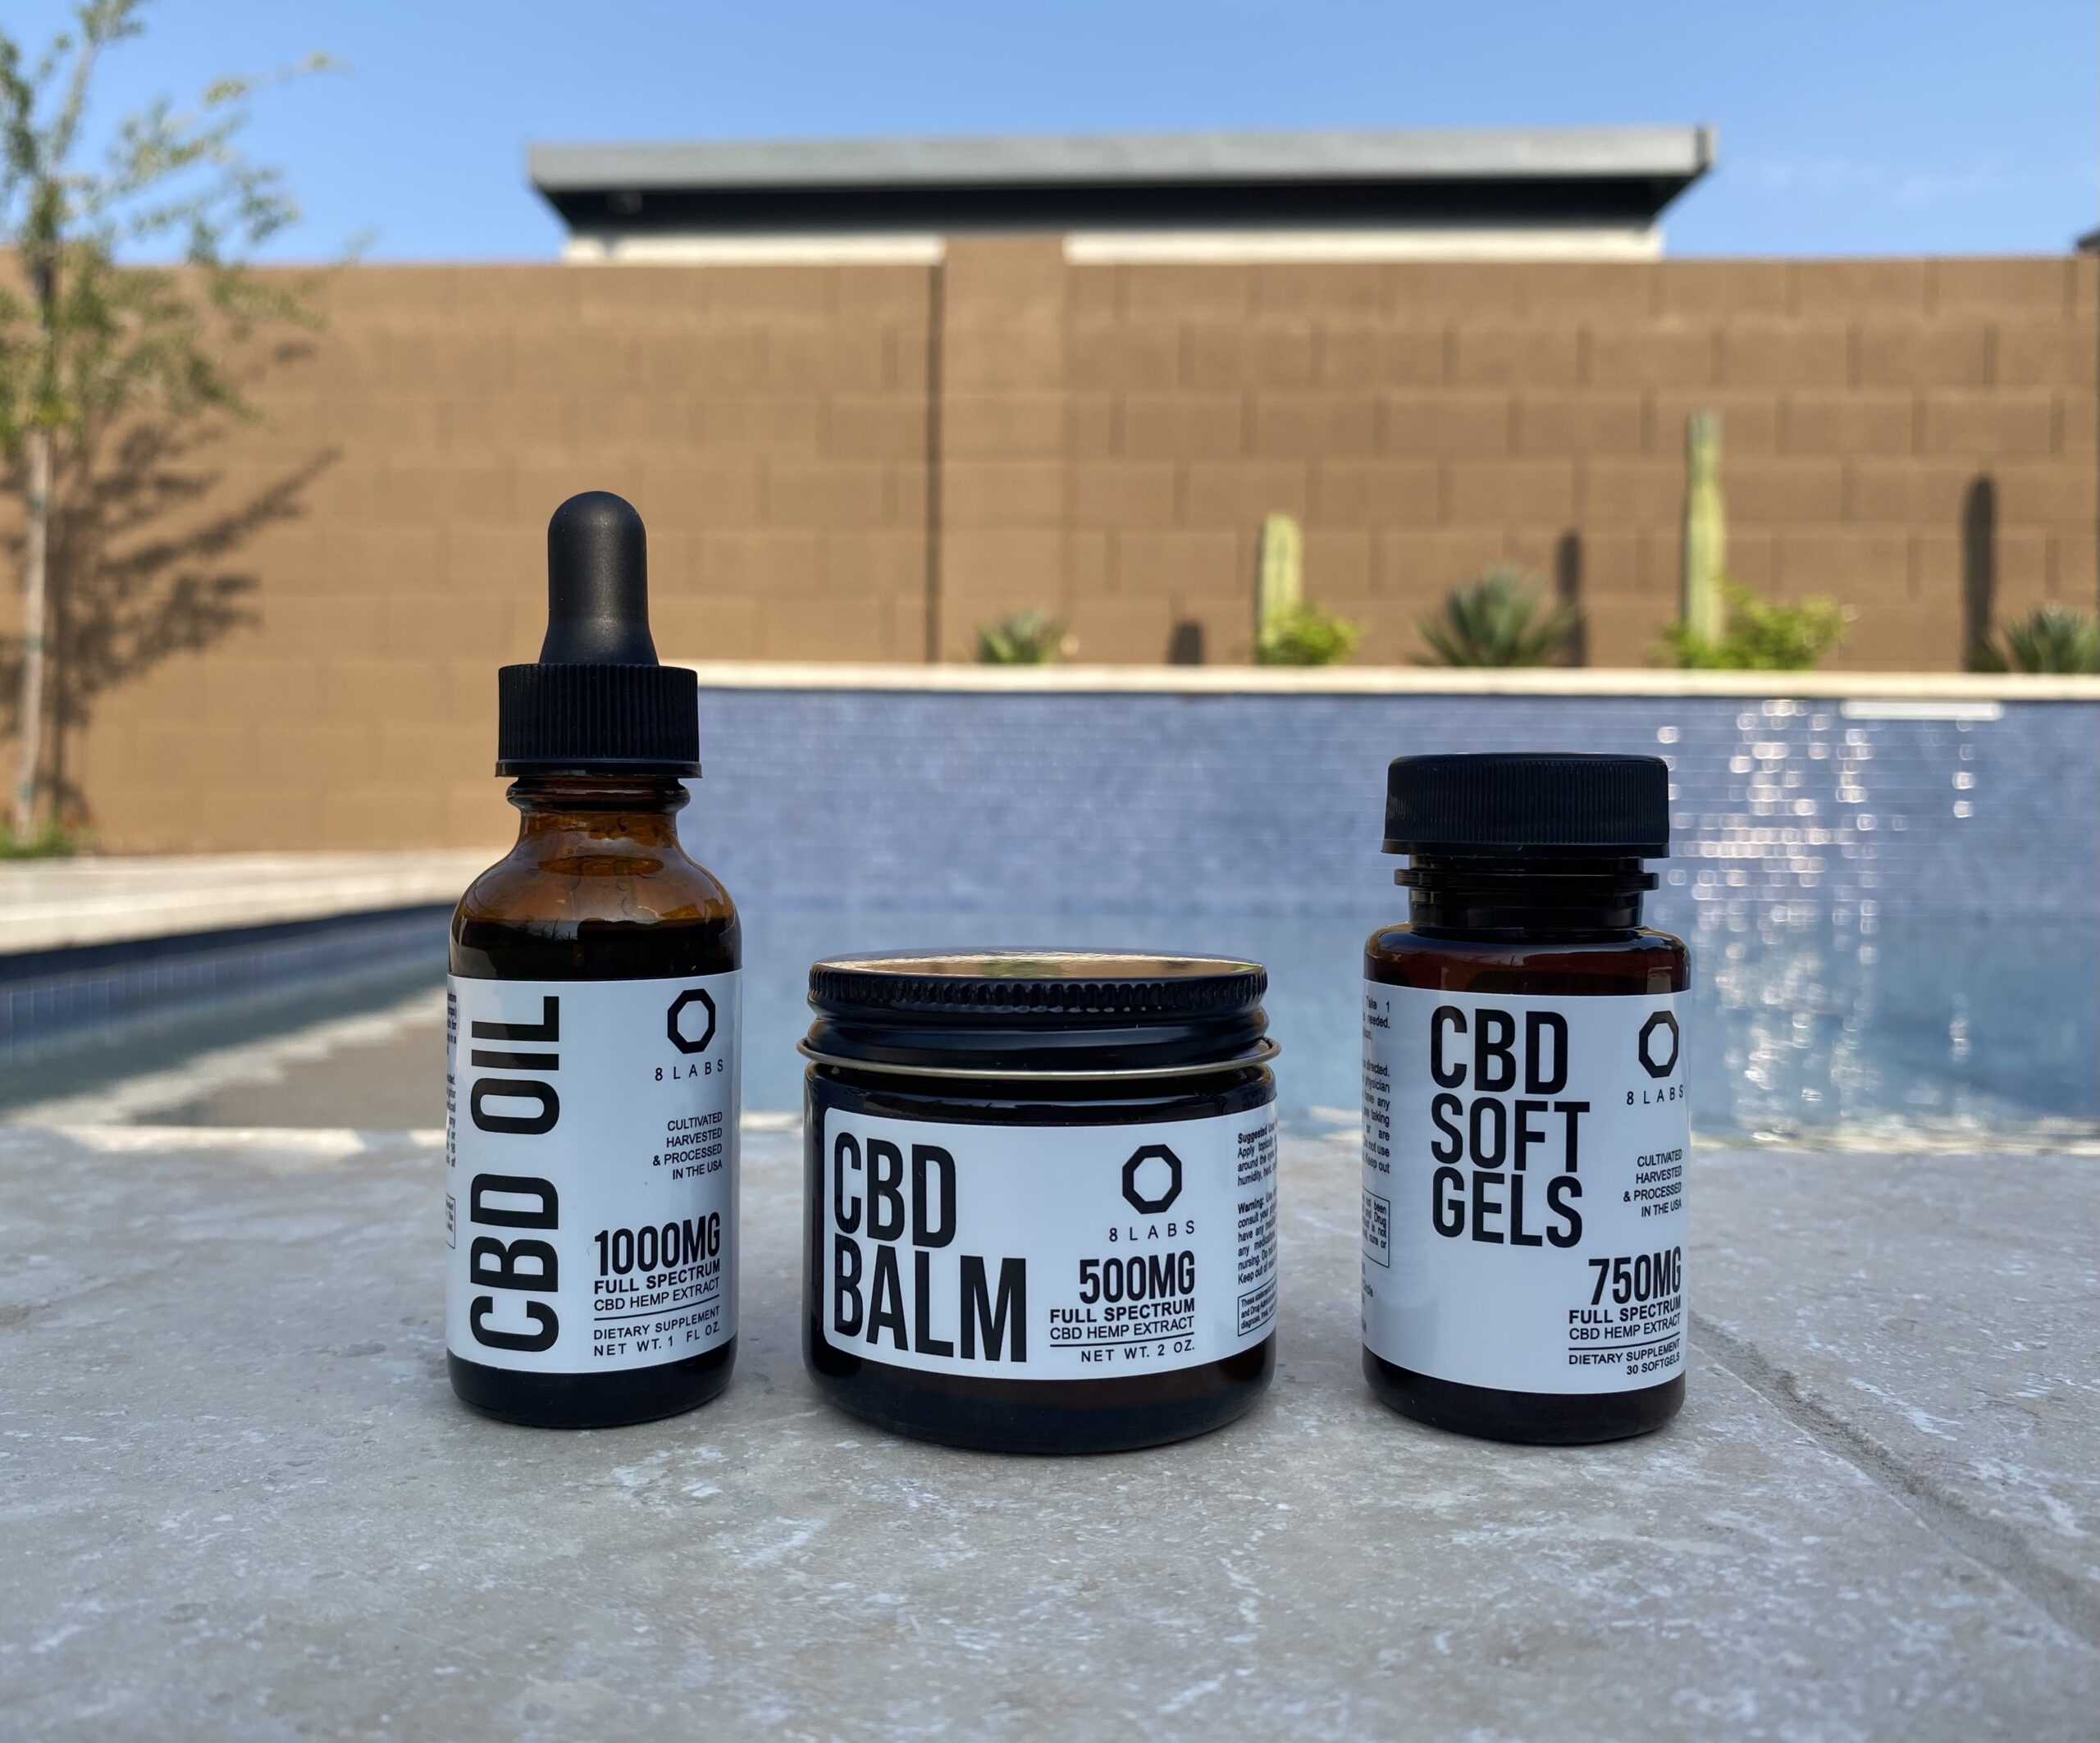 This Starter Bundle Is the Best Way to Get Started With a CBD Routine